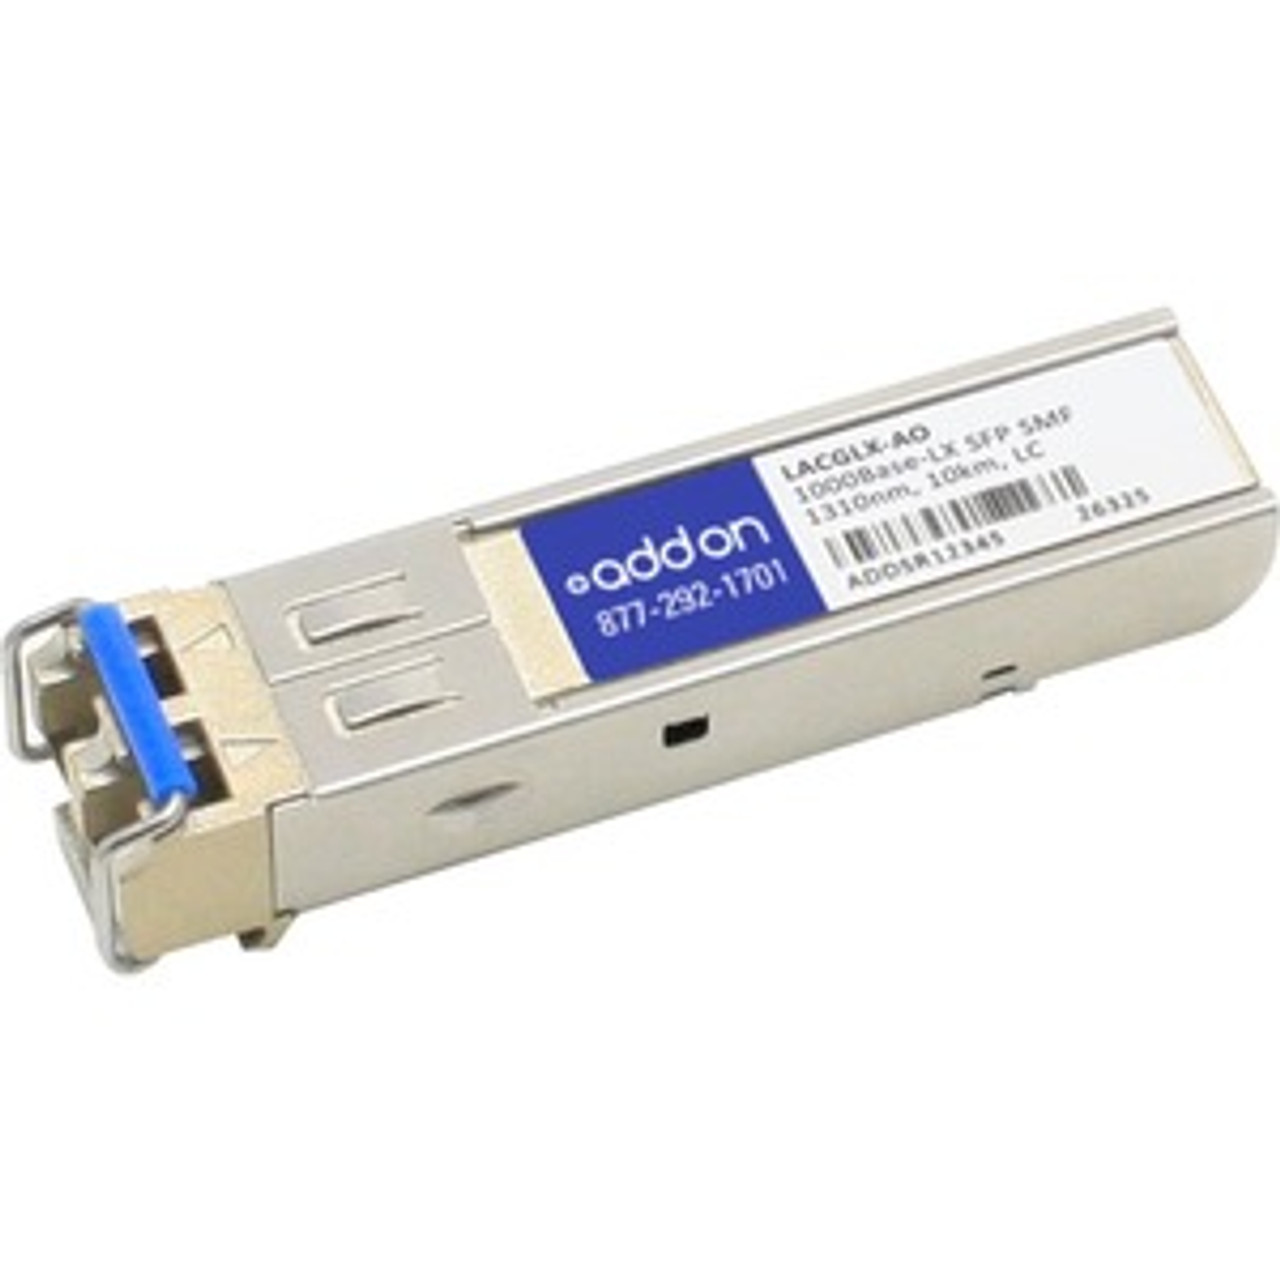 LACGLX-AO AddOn 1Gbps 1000Base-LX Single-mode Fiber 10km 1310nm Duplex LC Connector SFP Transceiver Module for Linksys Compatible